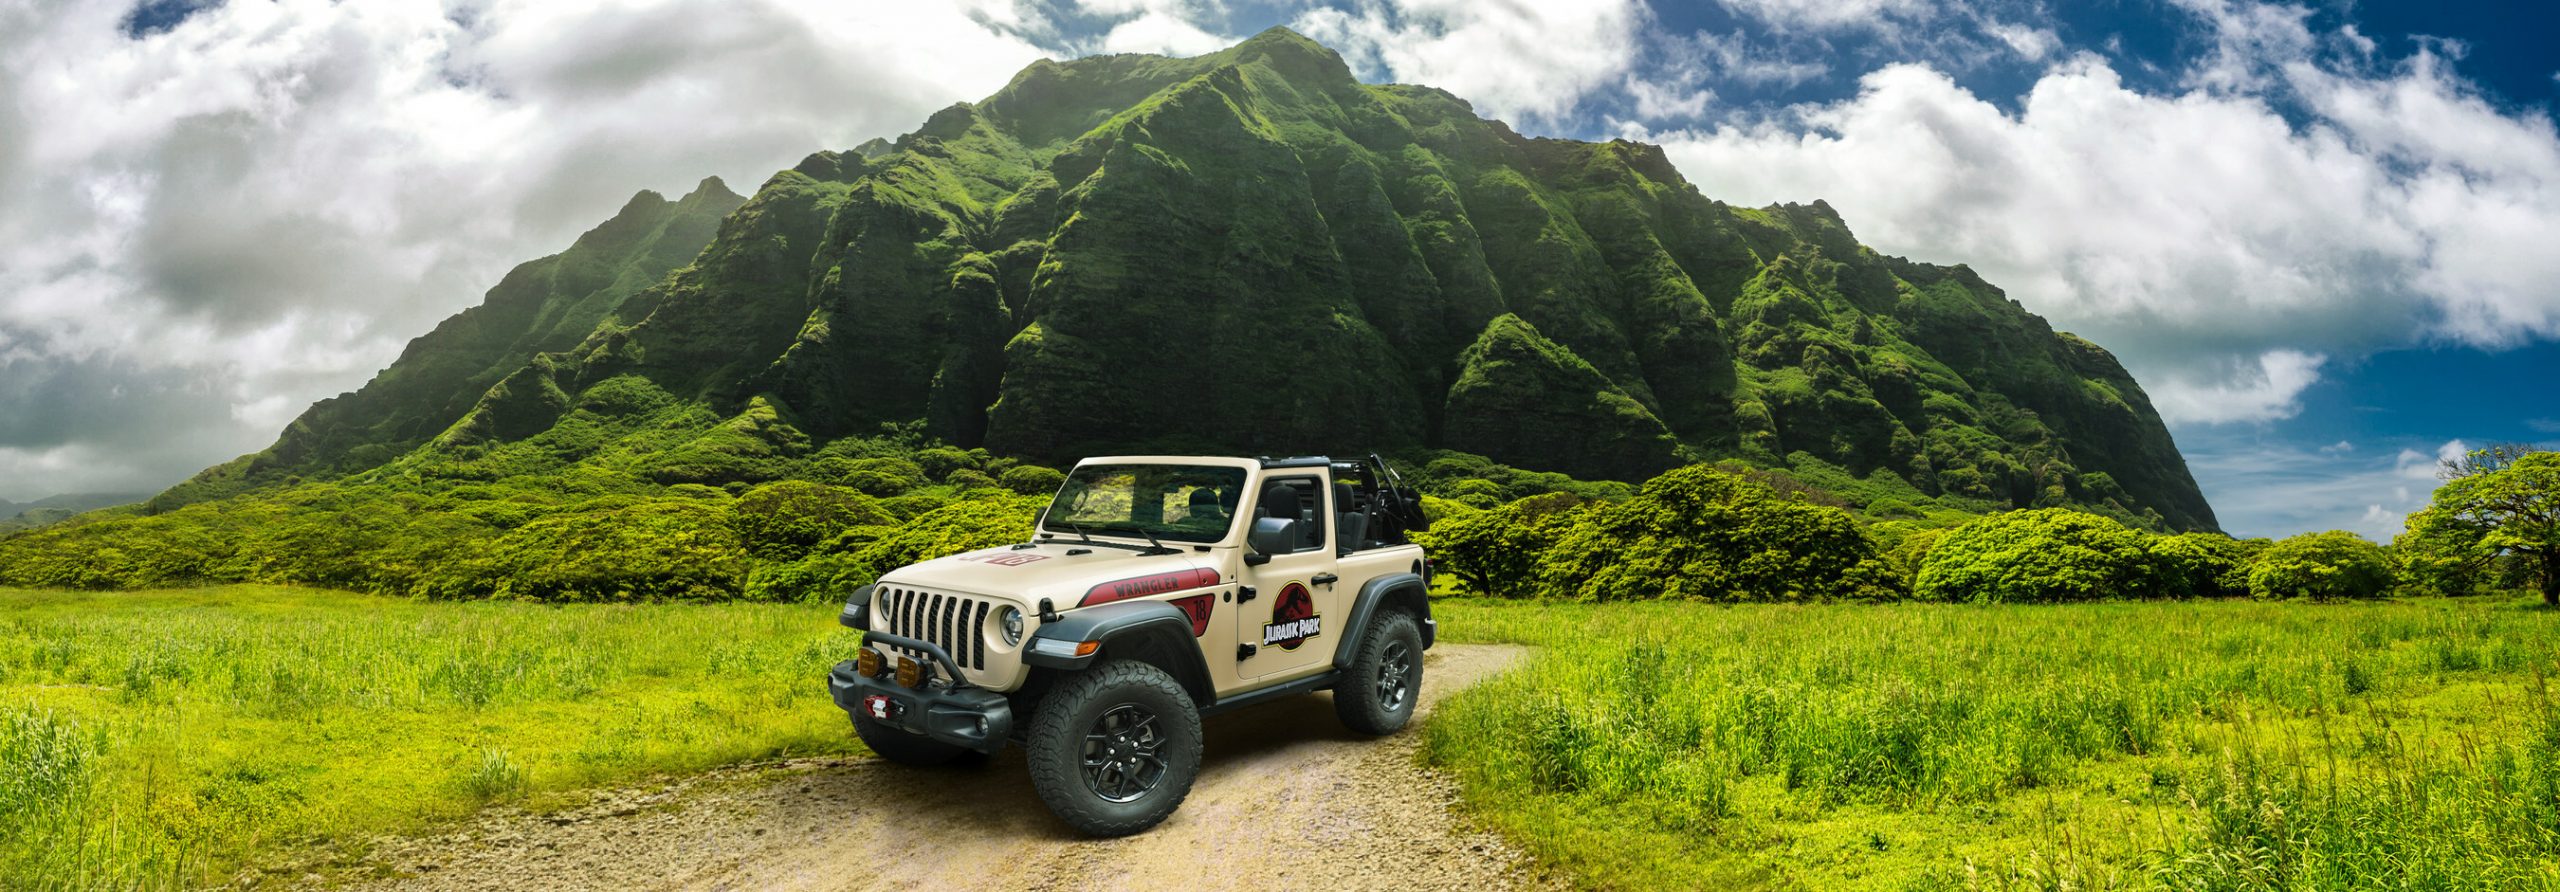 Jeep Graphic Studio Launches Vehicle Graphics Package to Celebrate Jurassic Park’s 30th Anniversary!